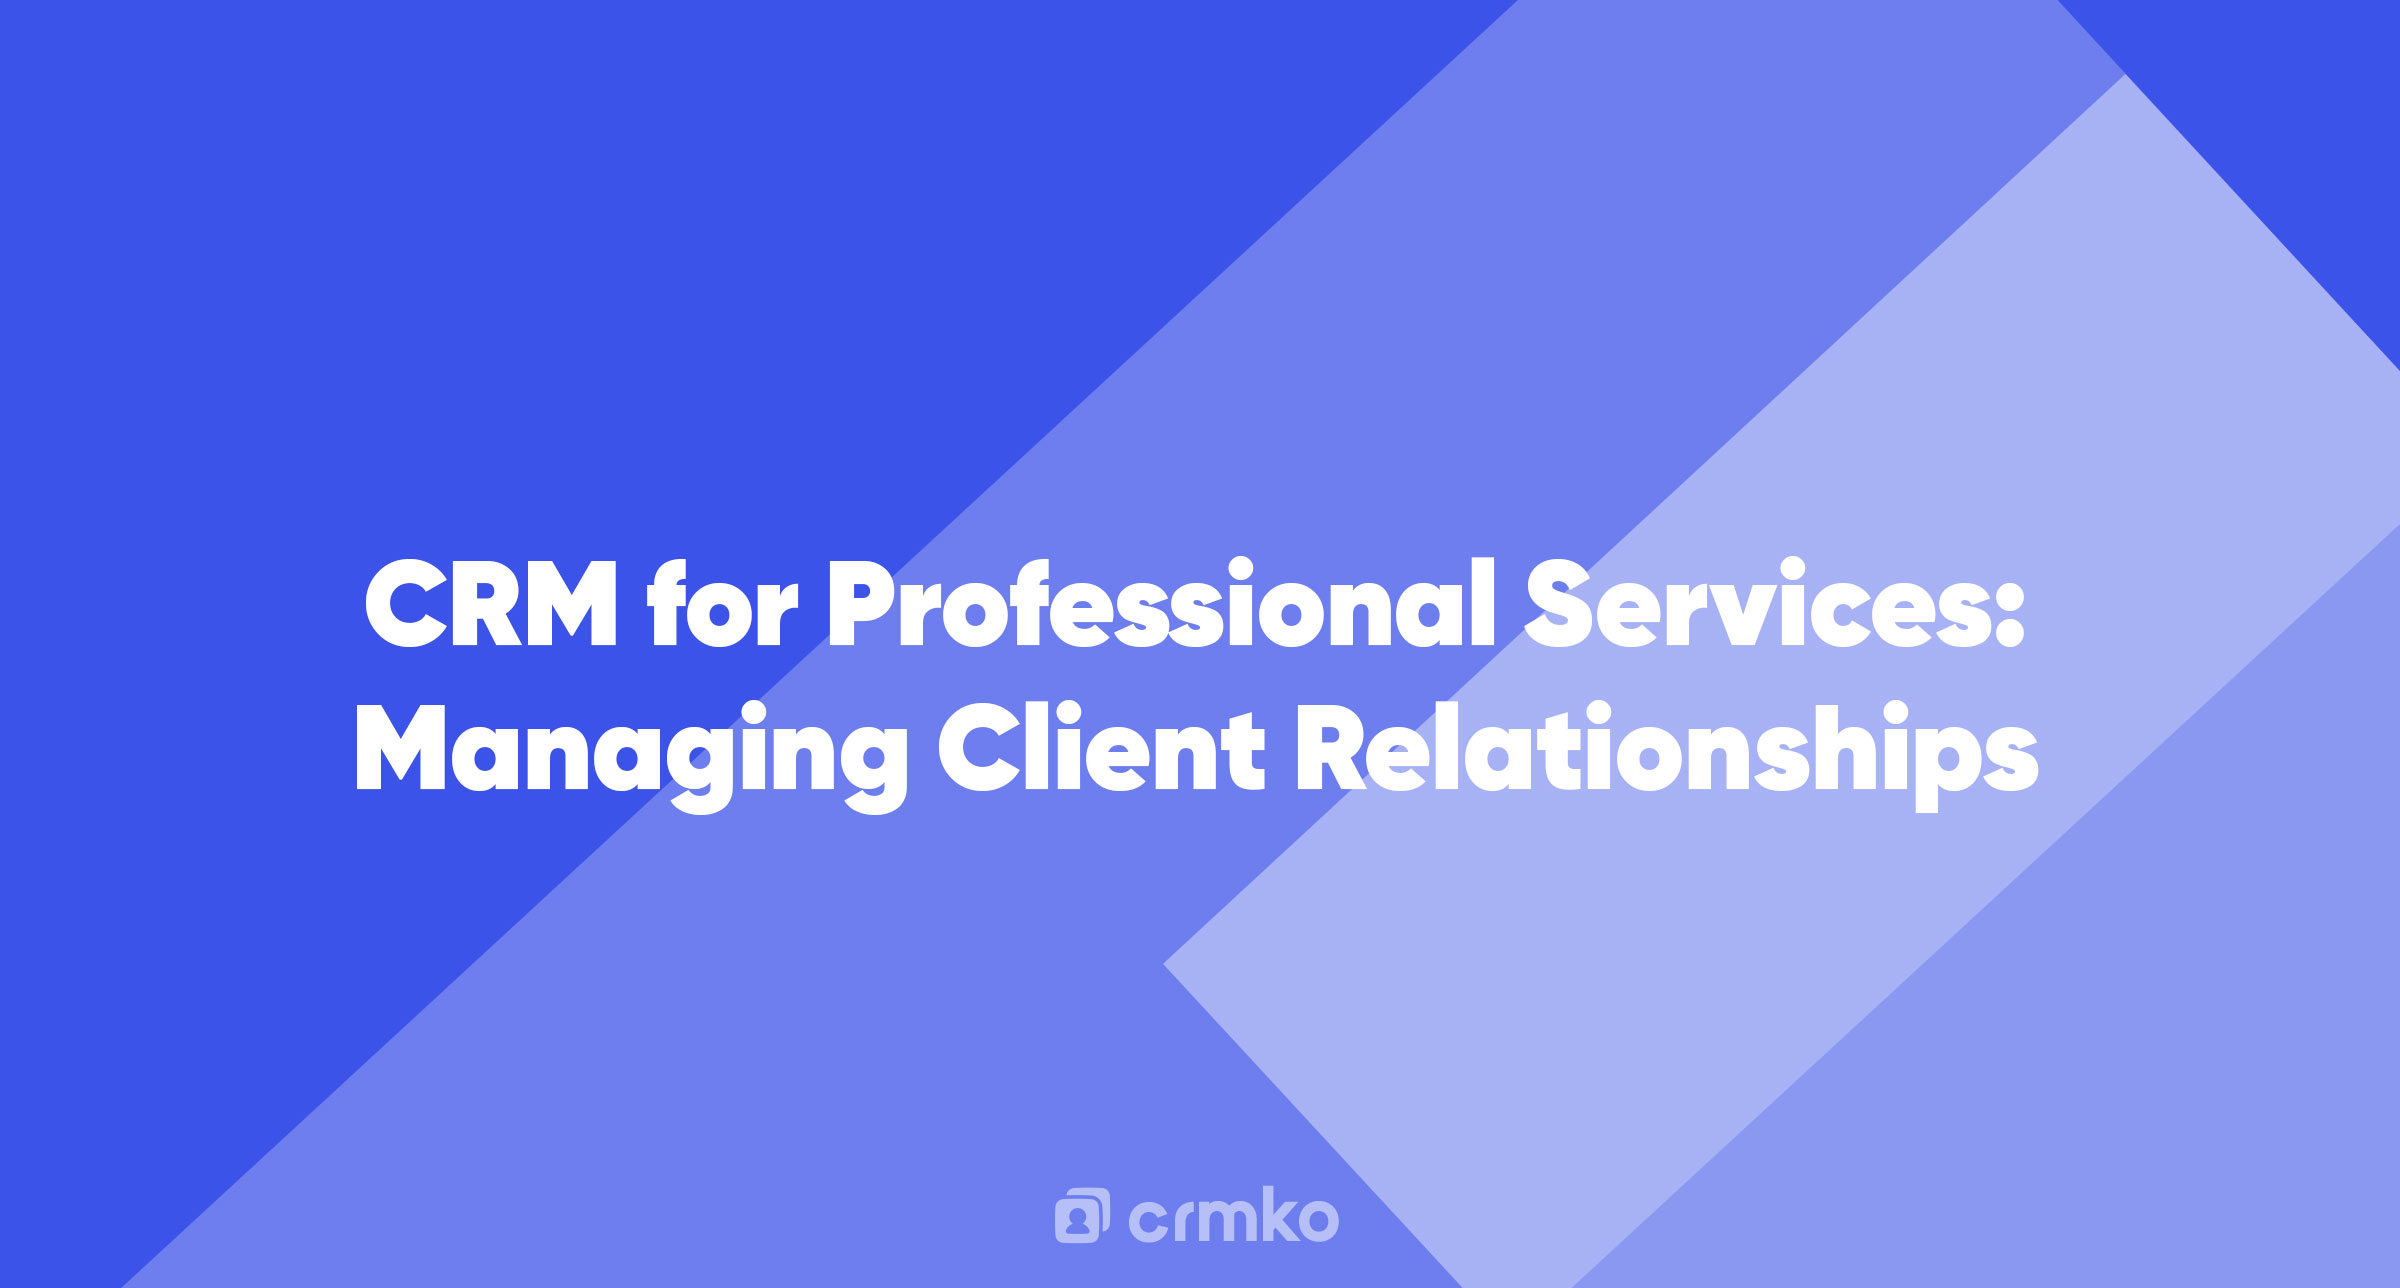 Article | CRM for Professional Services: Managing Client Relationships